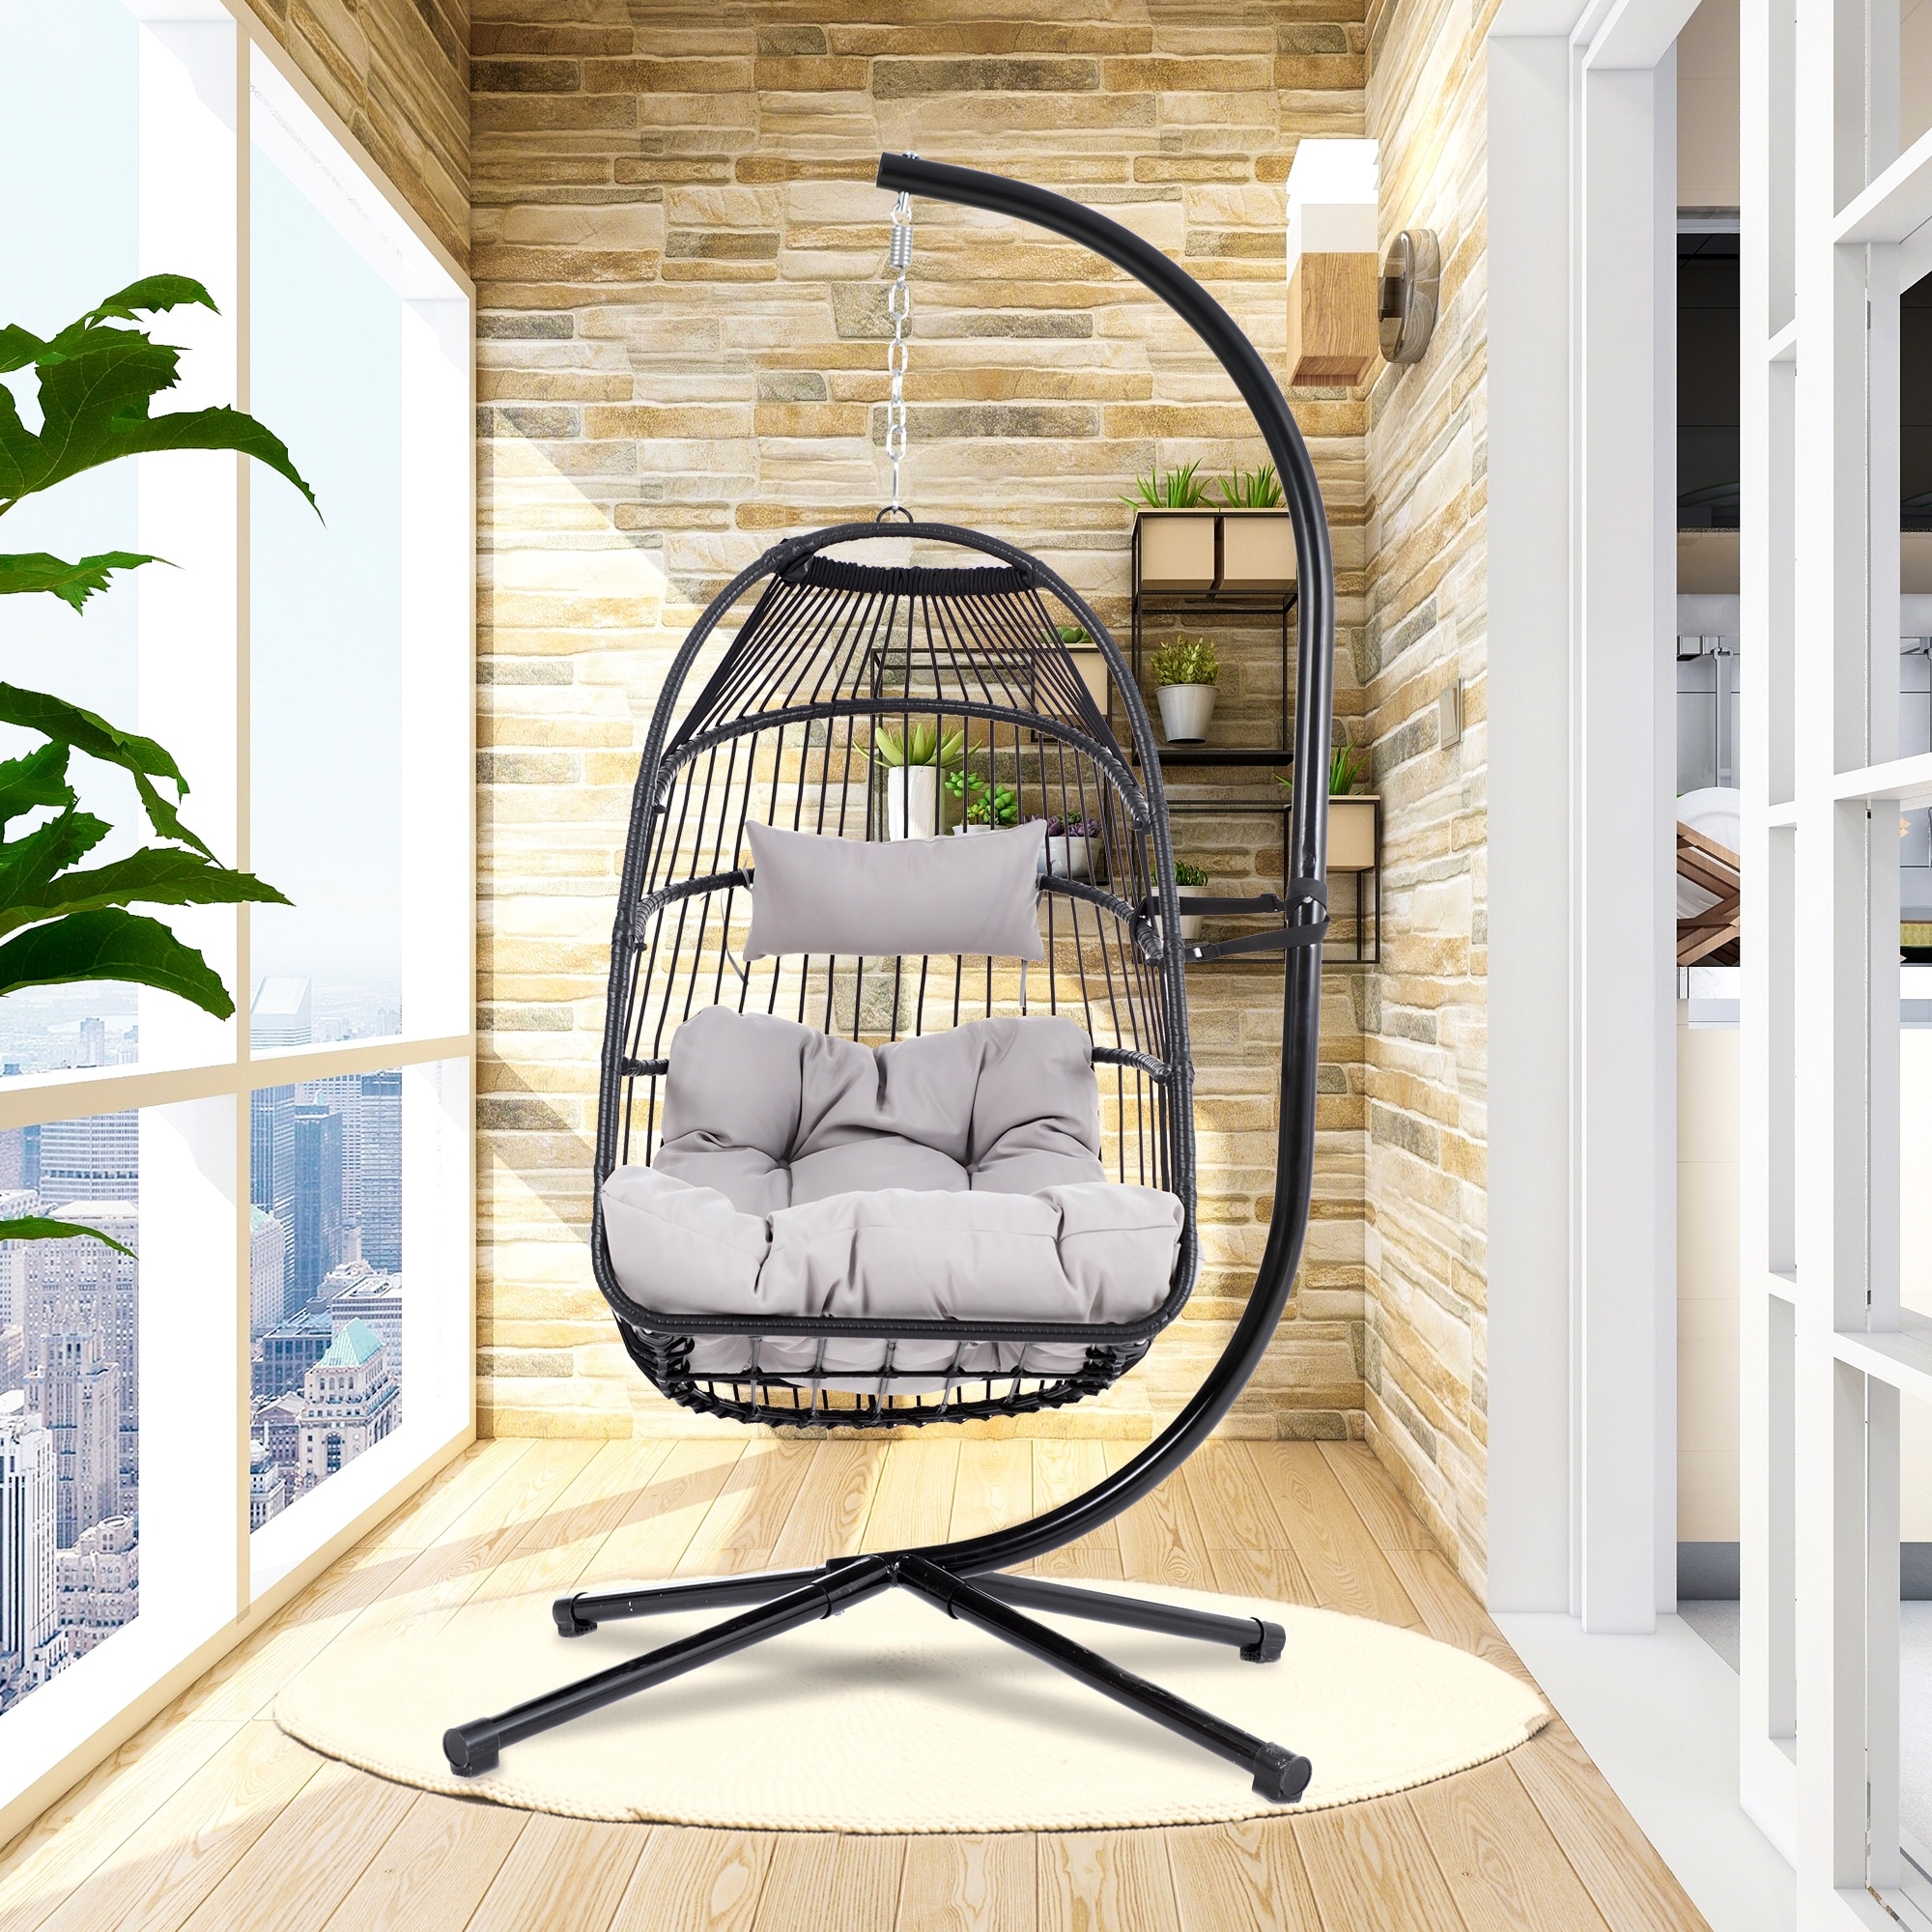 Global Pronex Patio Foldable Swing Chair Porch PE Wicker Egg Hanging Chair Hammock Chair Stand and Cushion for Outdoor Balcony Indoor Bedroom